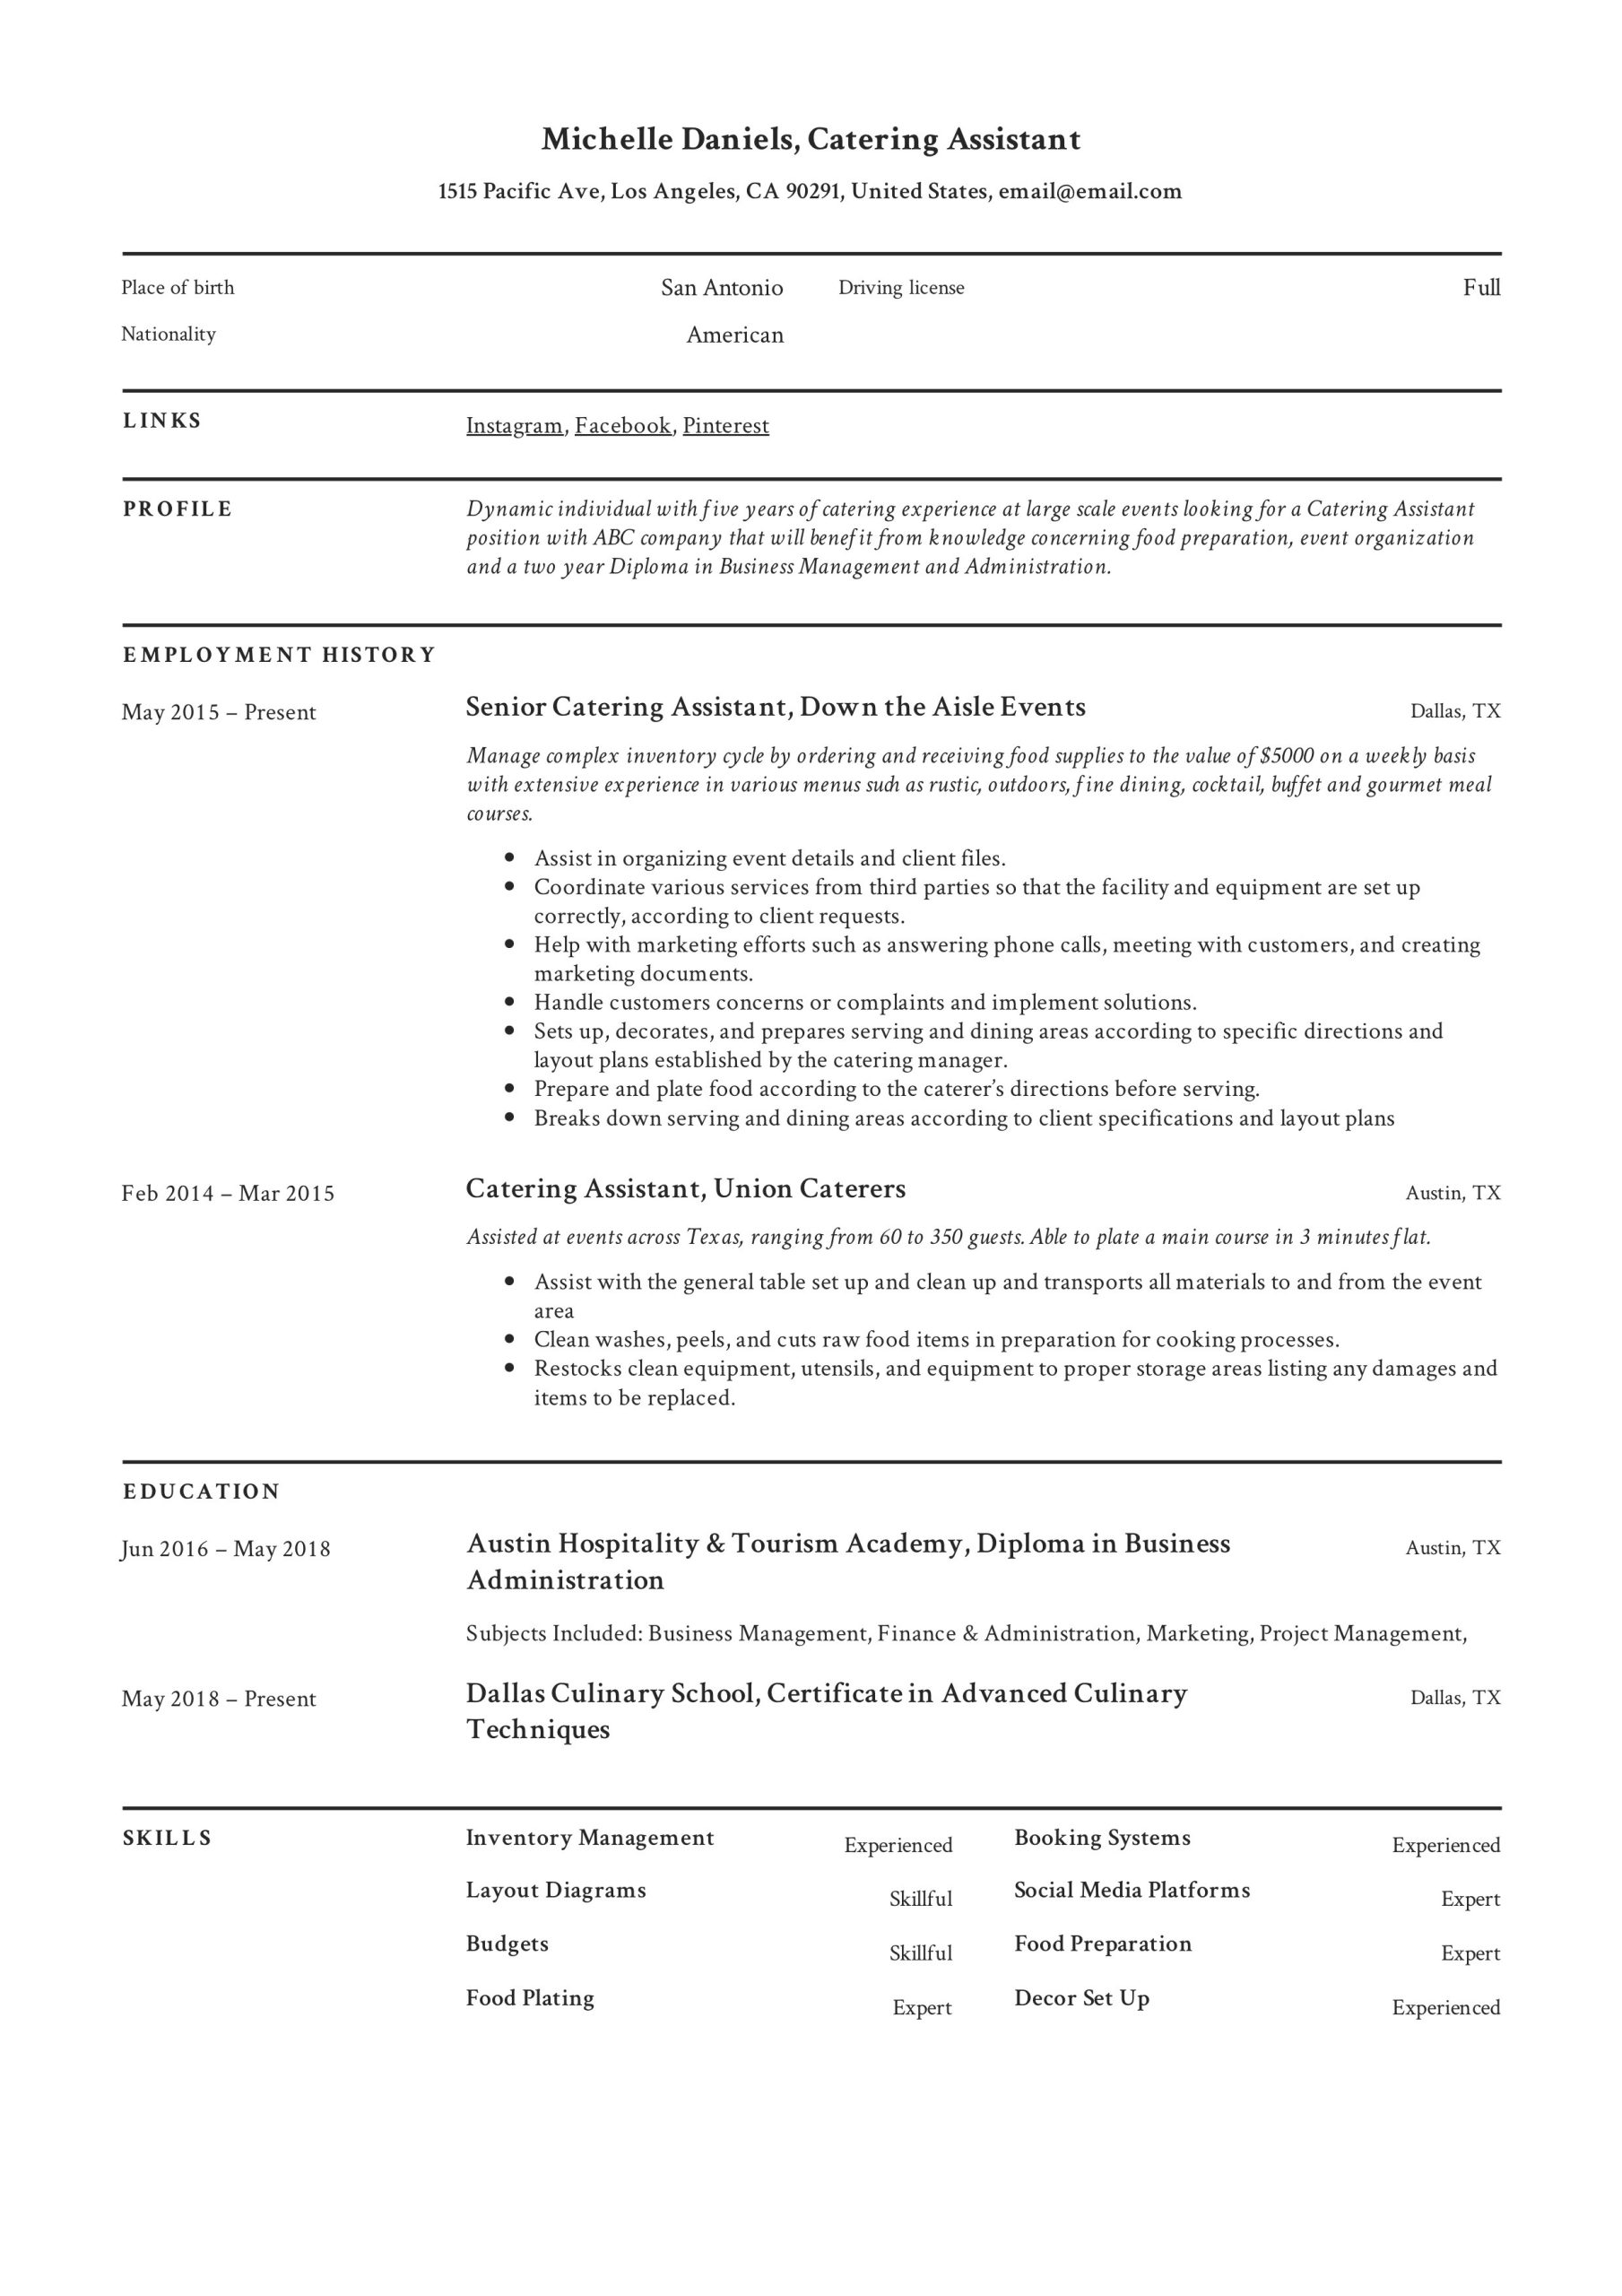 Institutional Food Service Worker Resume Sample Guide: Catering assistant Resume [   12 Samples ] Pdf & Word 2022